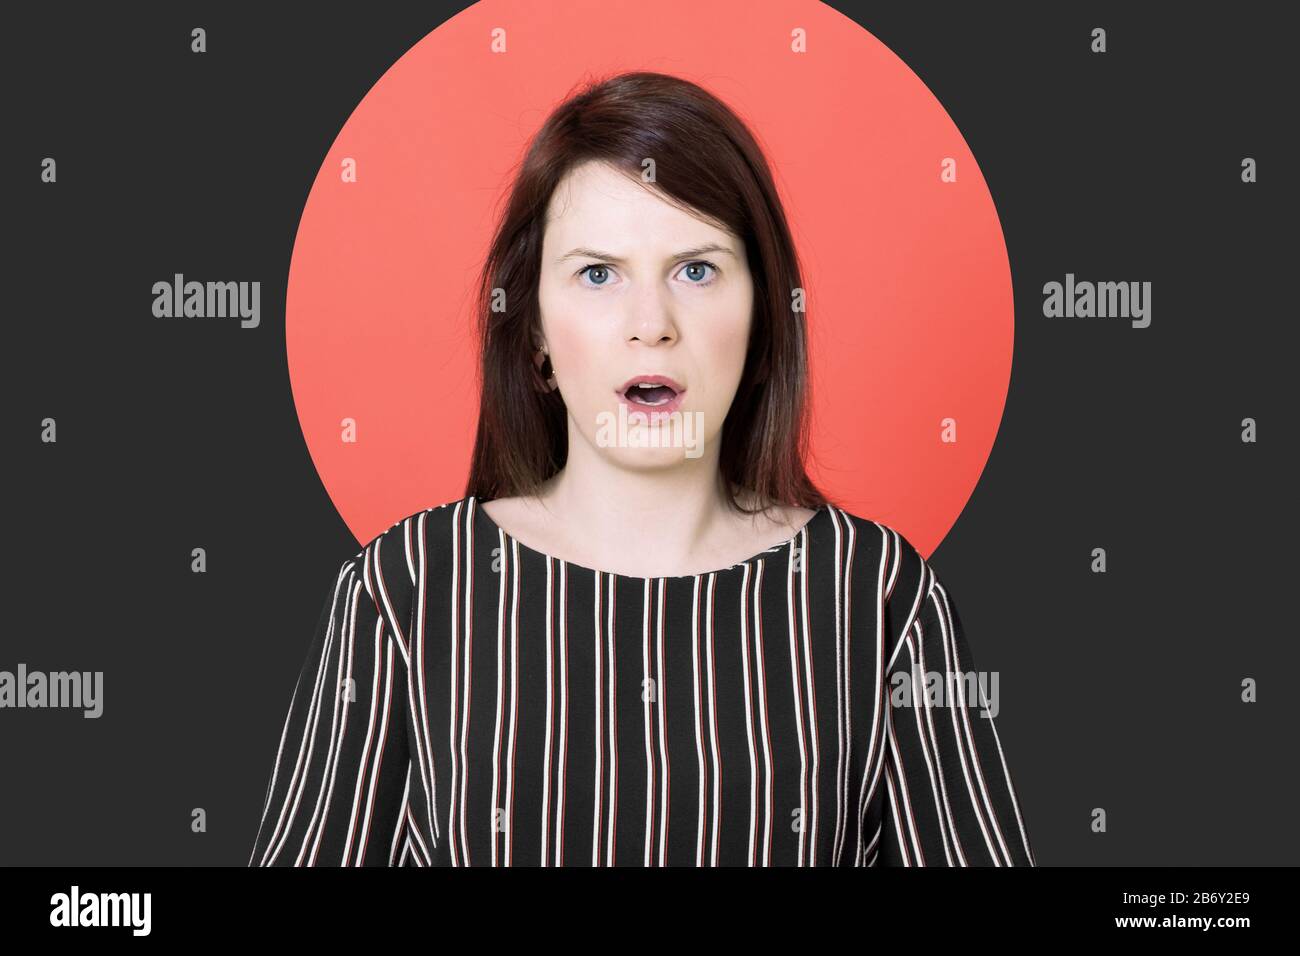 emotional astonished and shocked caucasian woman with open mouth and eyes wide open looking straight to the camera against a colored background Stock Photo